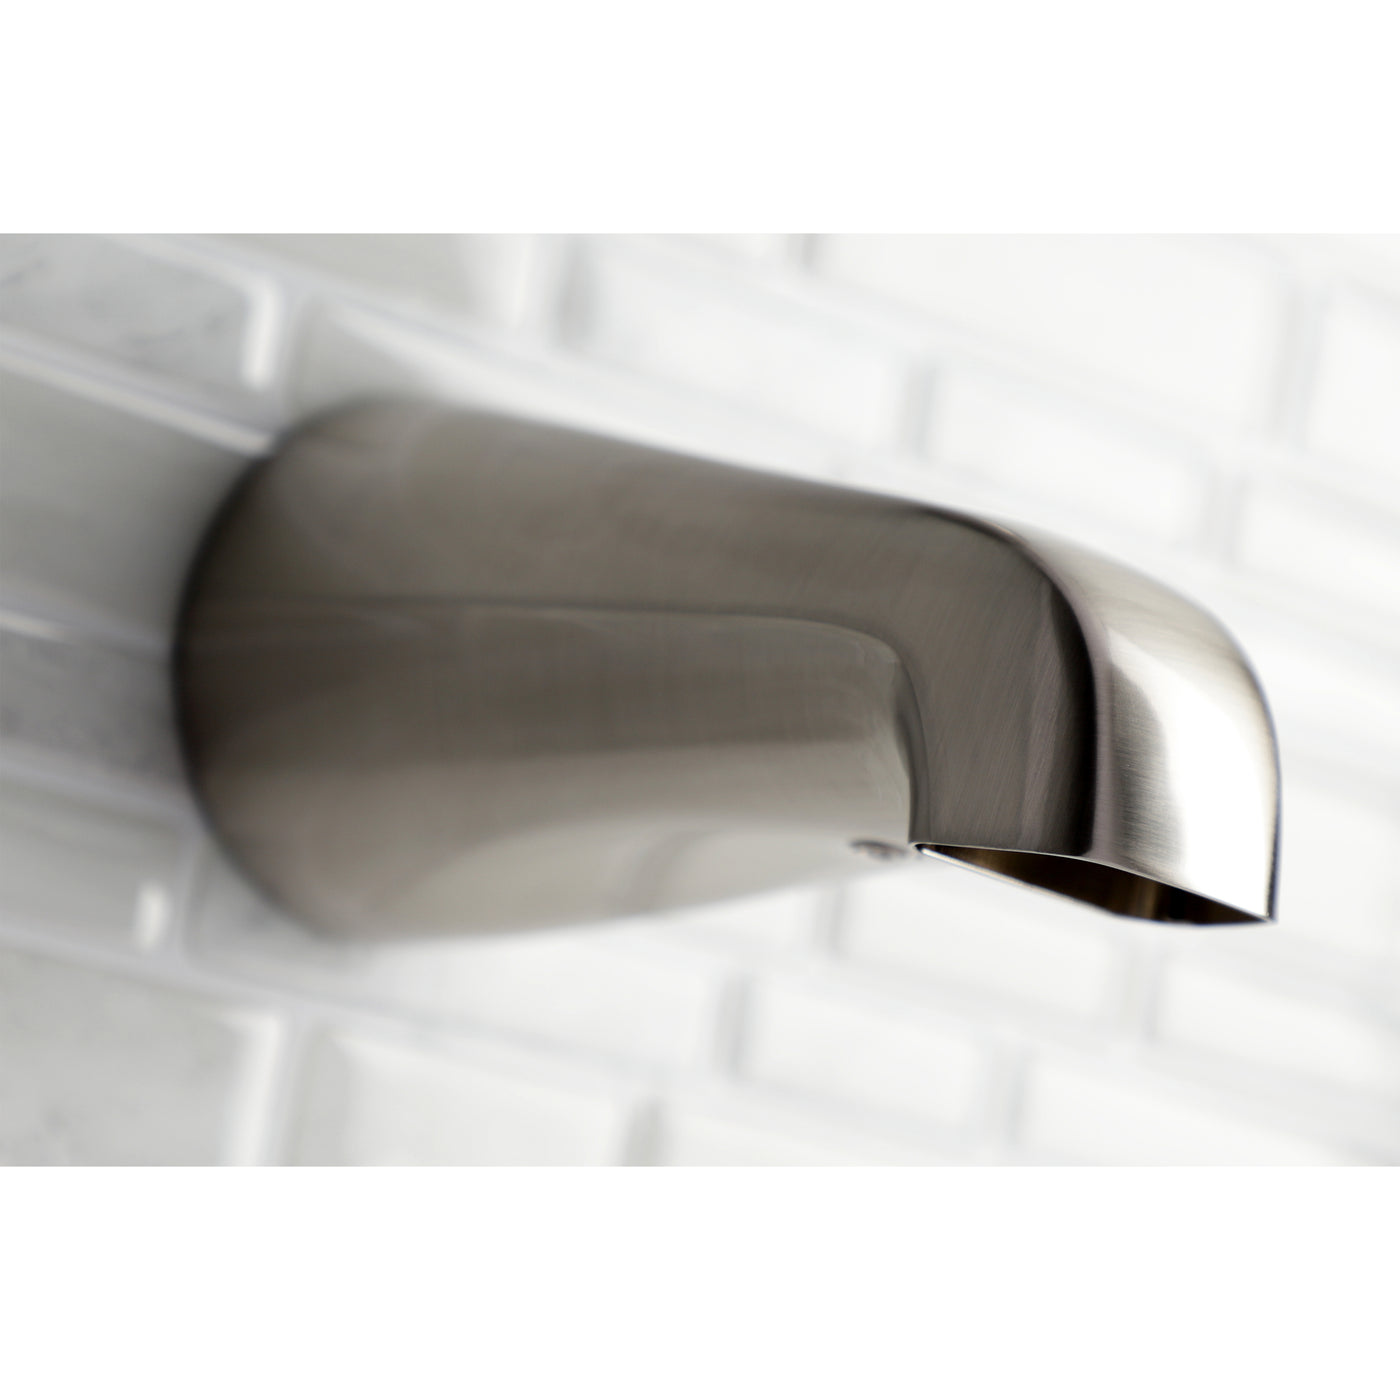 Elements of Design DK187A8 5-1/4 Inch Tub Spout, Brushed Nickel